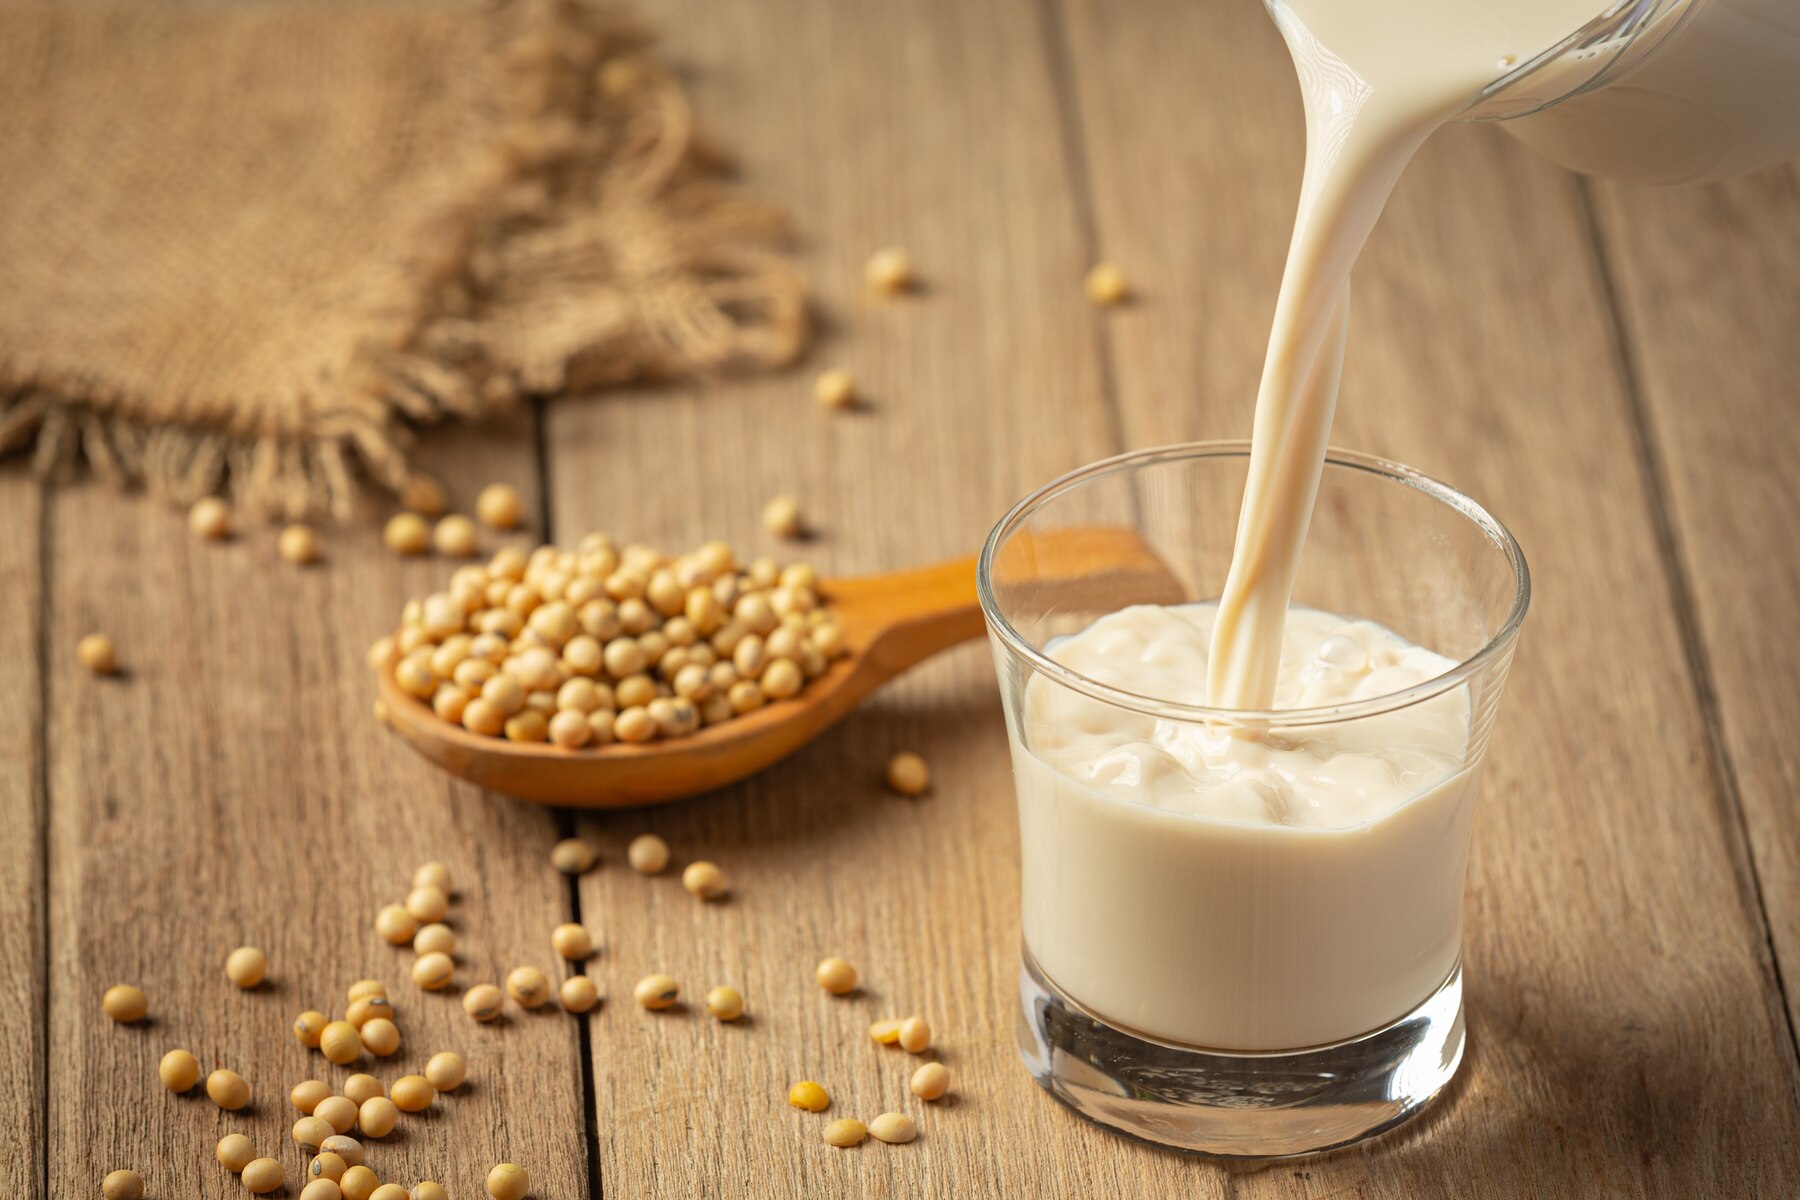 soy-milk-soy-food-and-beverage-products-food-nutrition-concept_1150-26335 (1).jpg